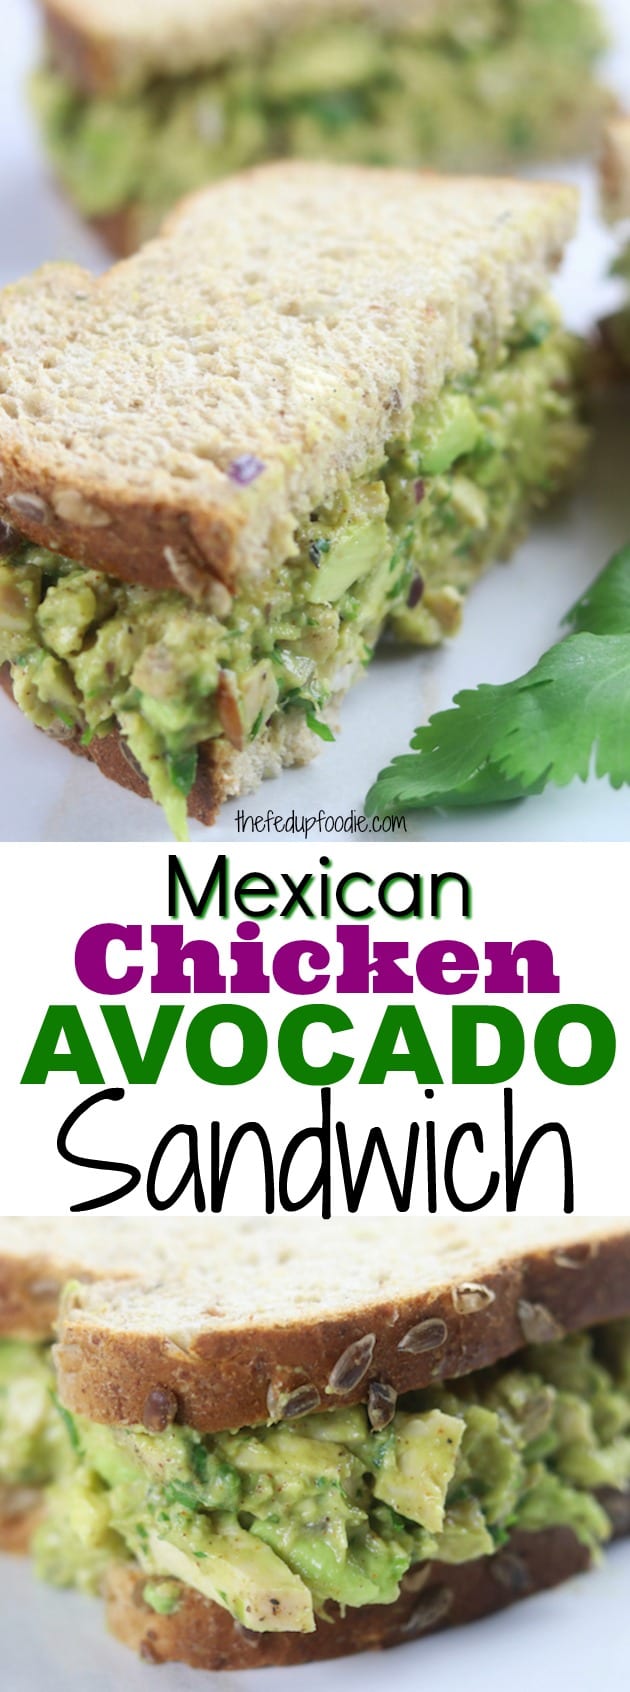 Clean eating just became so much more fun with this Mexican Chicken Avocado Sandwich. It is like having the best of two worlds, guacamole and a chicken salad sandwich. No more boring lunches! #ChickenAvocadoSandwich #ChickenSandwich https://www.thefedupfoodie.com